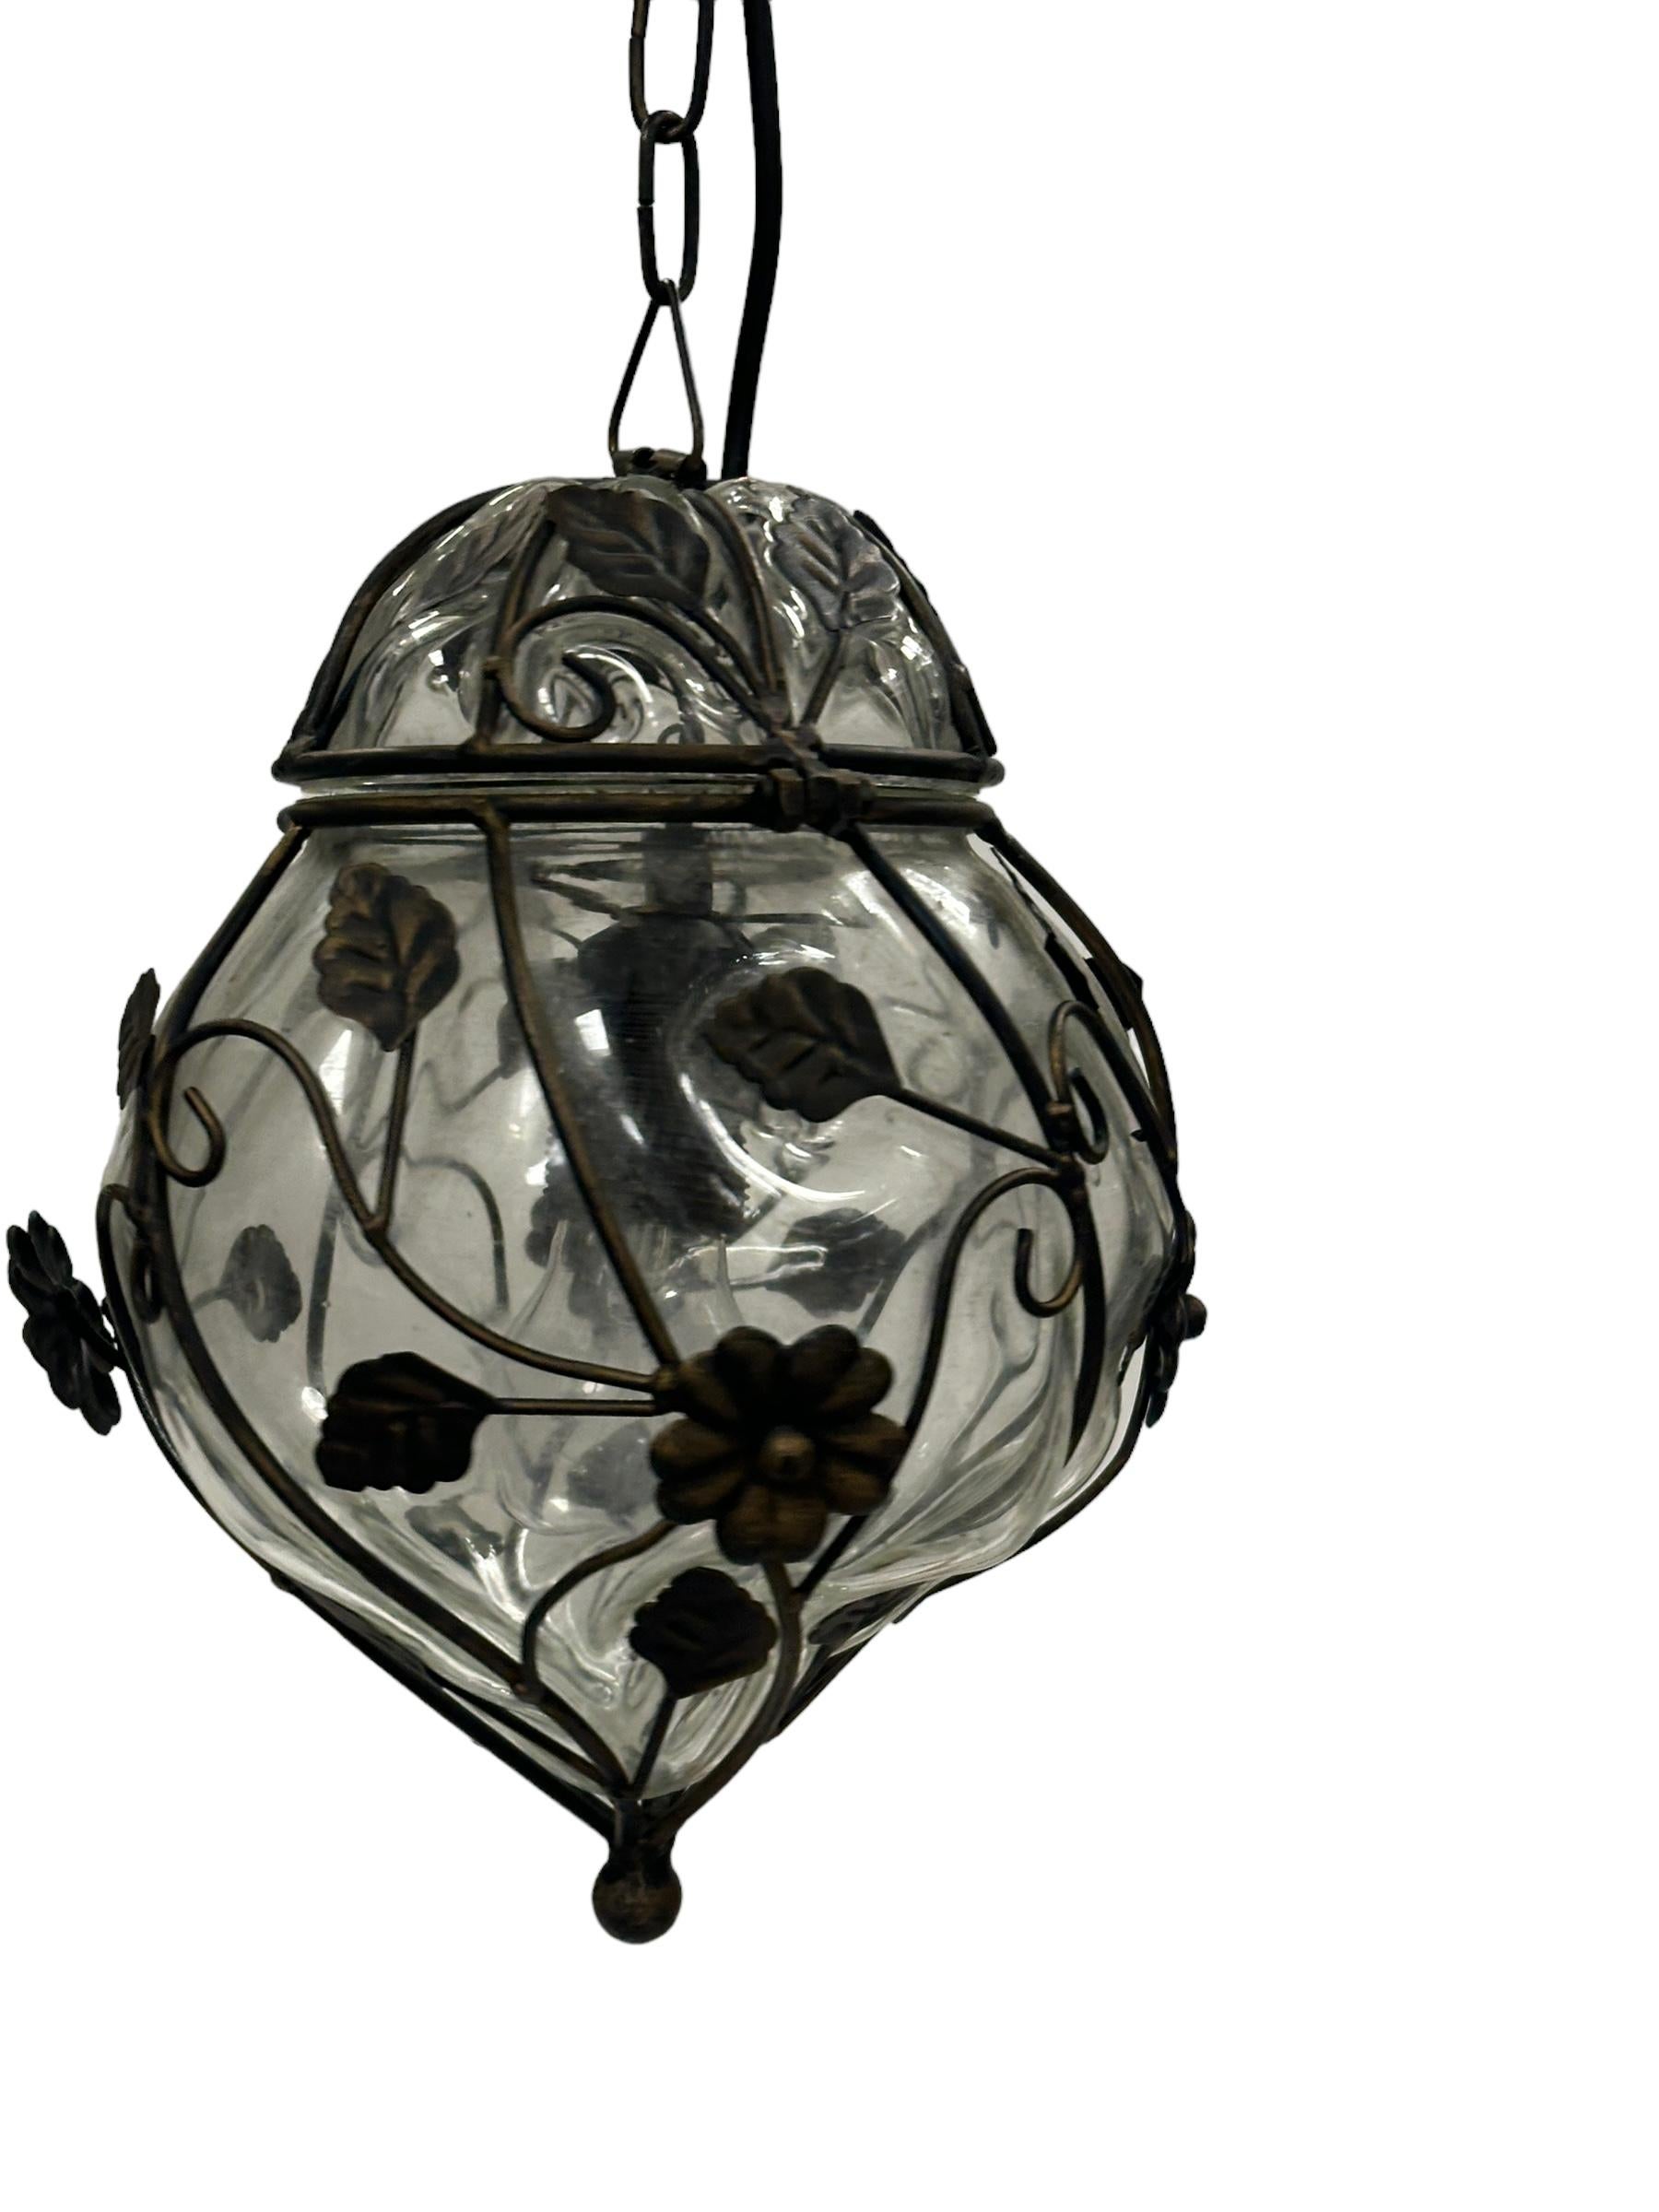 Petite Murano Caged Glass Pendant Light, 1960s Italy vintage In Good Condition For Sale In Nuernberg, DE